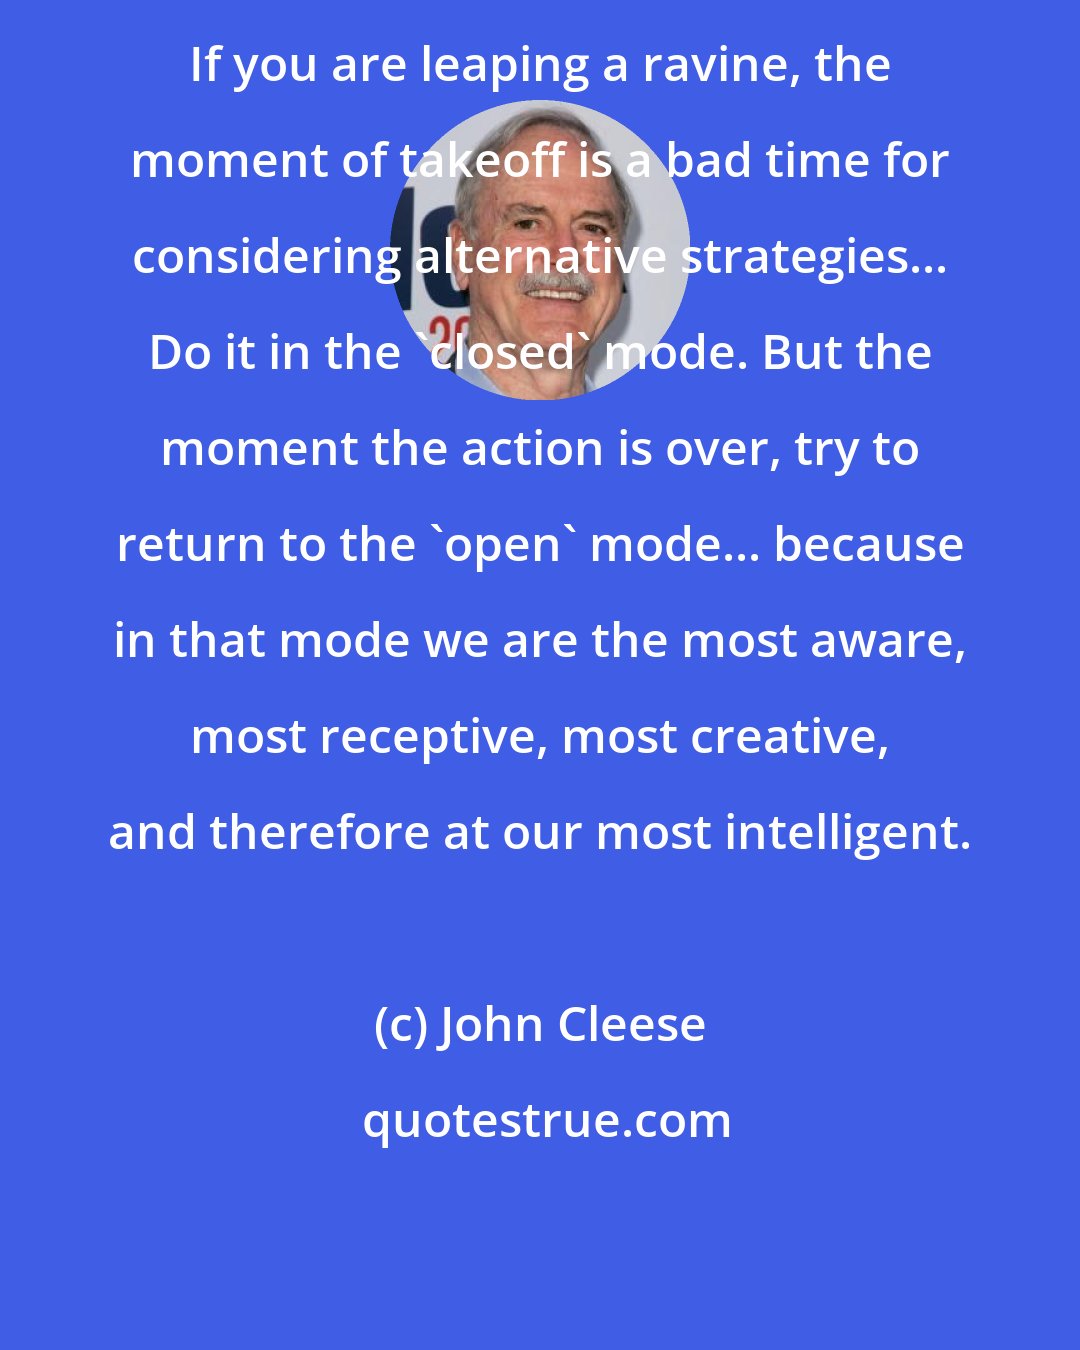 John Cleese: If you are leaping a ravine, the moment of takeoff is a bad time for considering alternative strategies... Do it in the 'closed' mode. But the moment the action is over, try to return to the 'open' mode... because in that mode we are the most aware, most receptive, most creative, and therefore at our most intelligent.